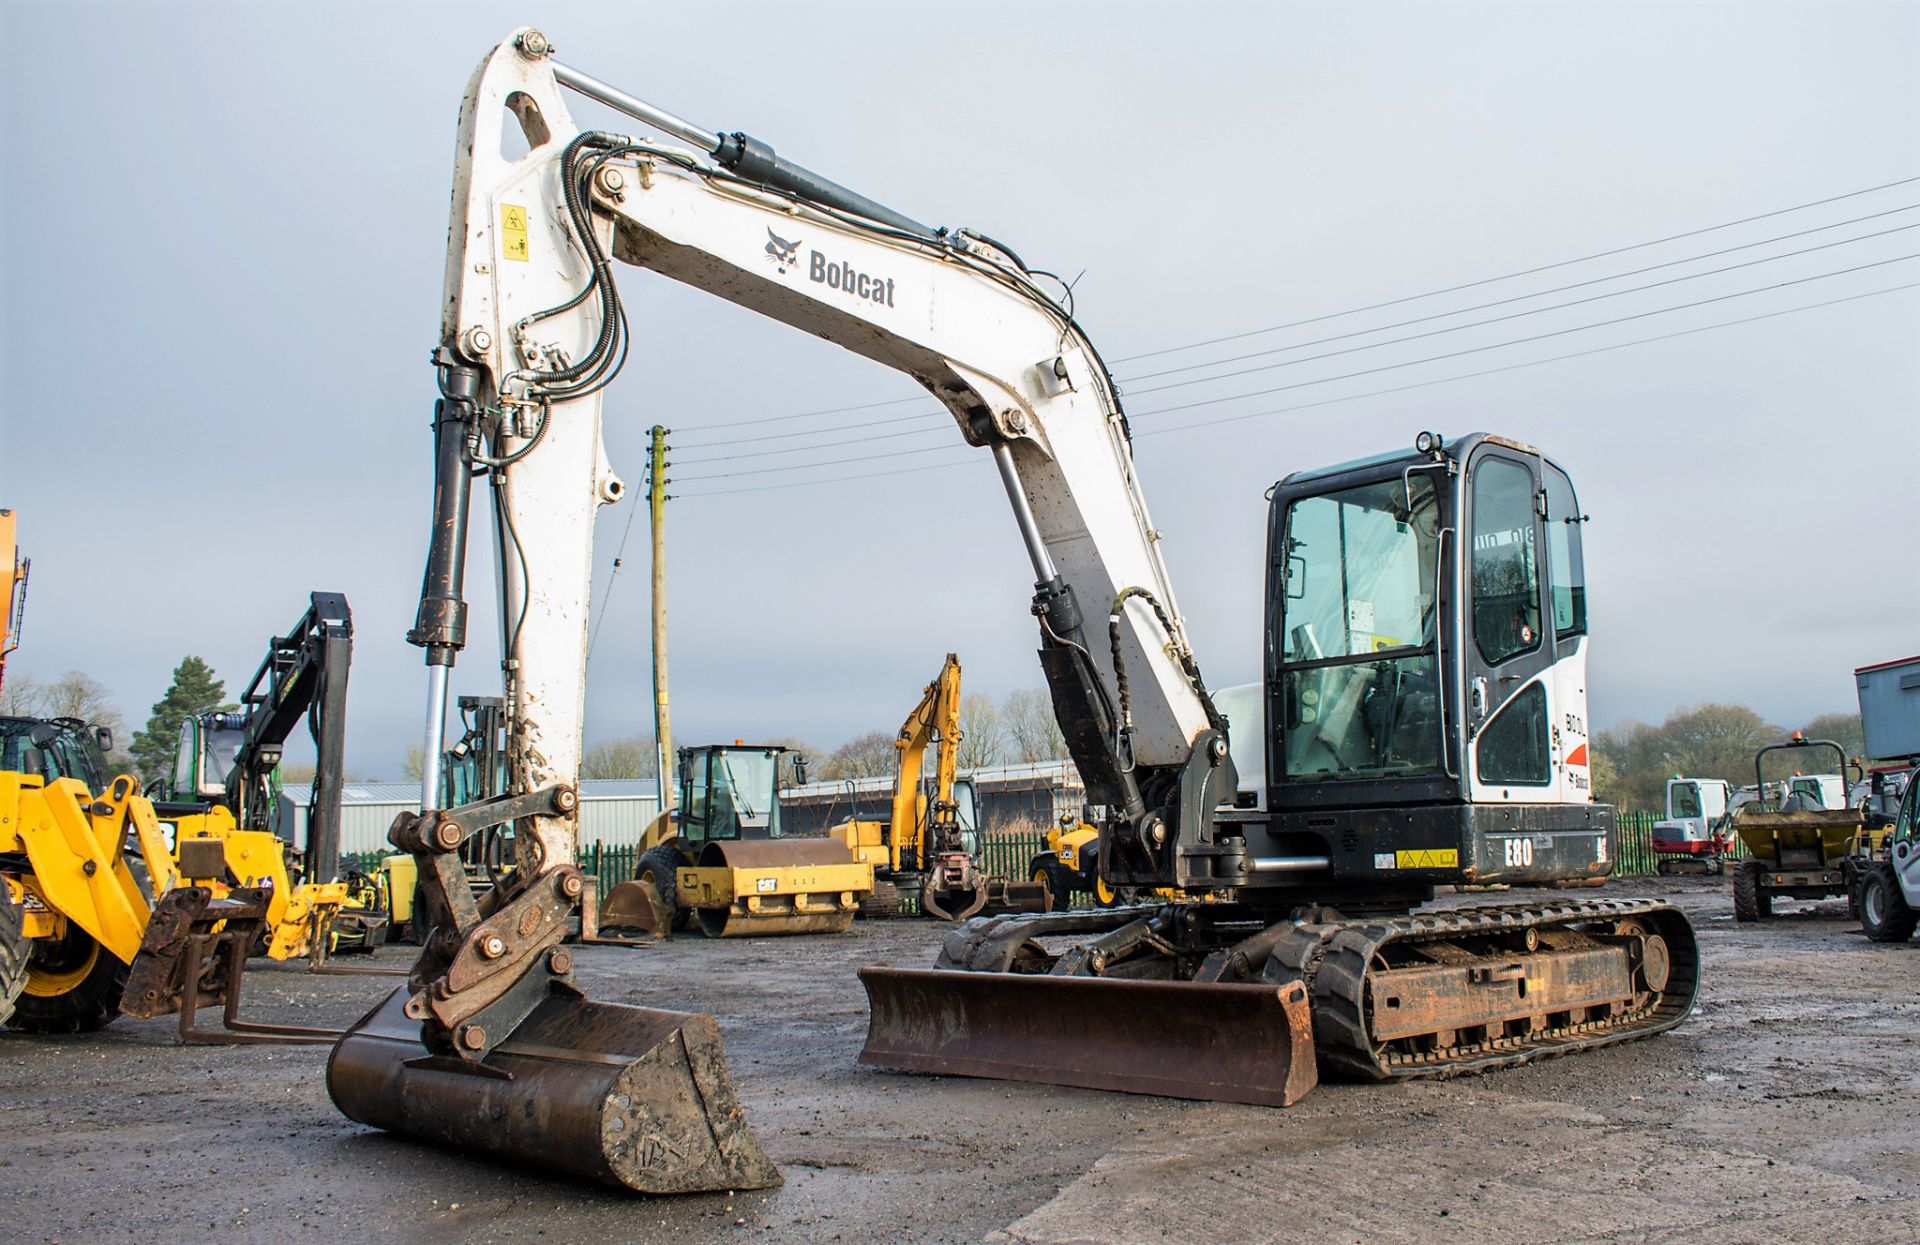 Bobcat E80 8 tonne rubber tracked excavator Year: 2012 S/N: AET312518 Recorded Hours: 2934 blade,